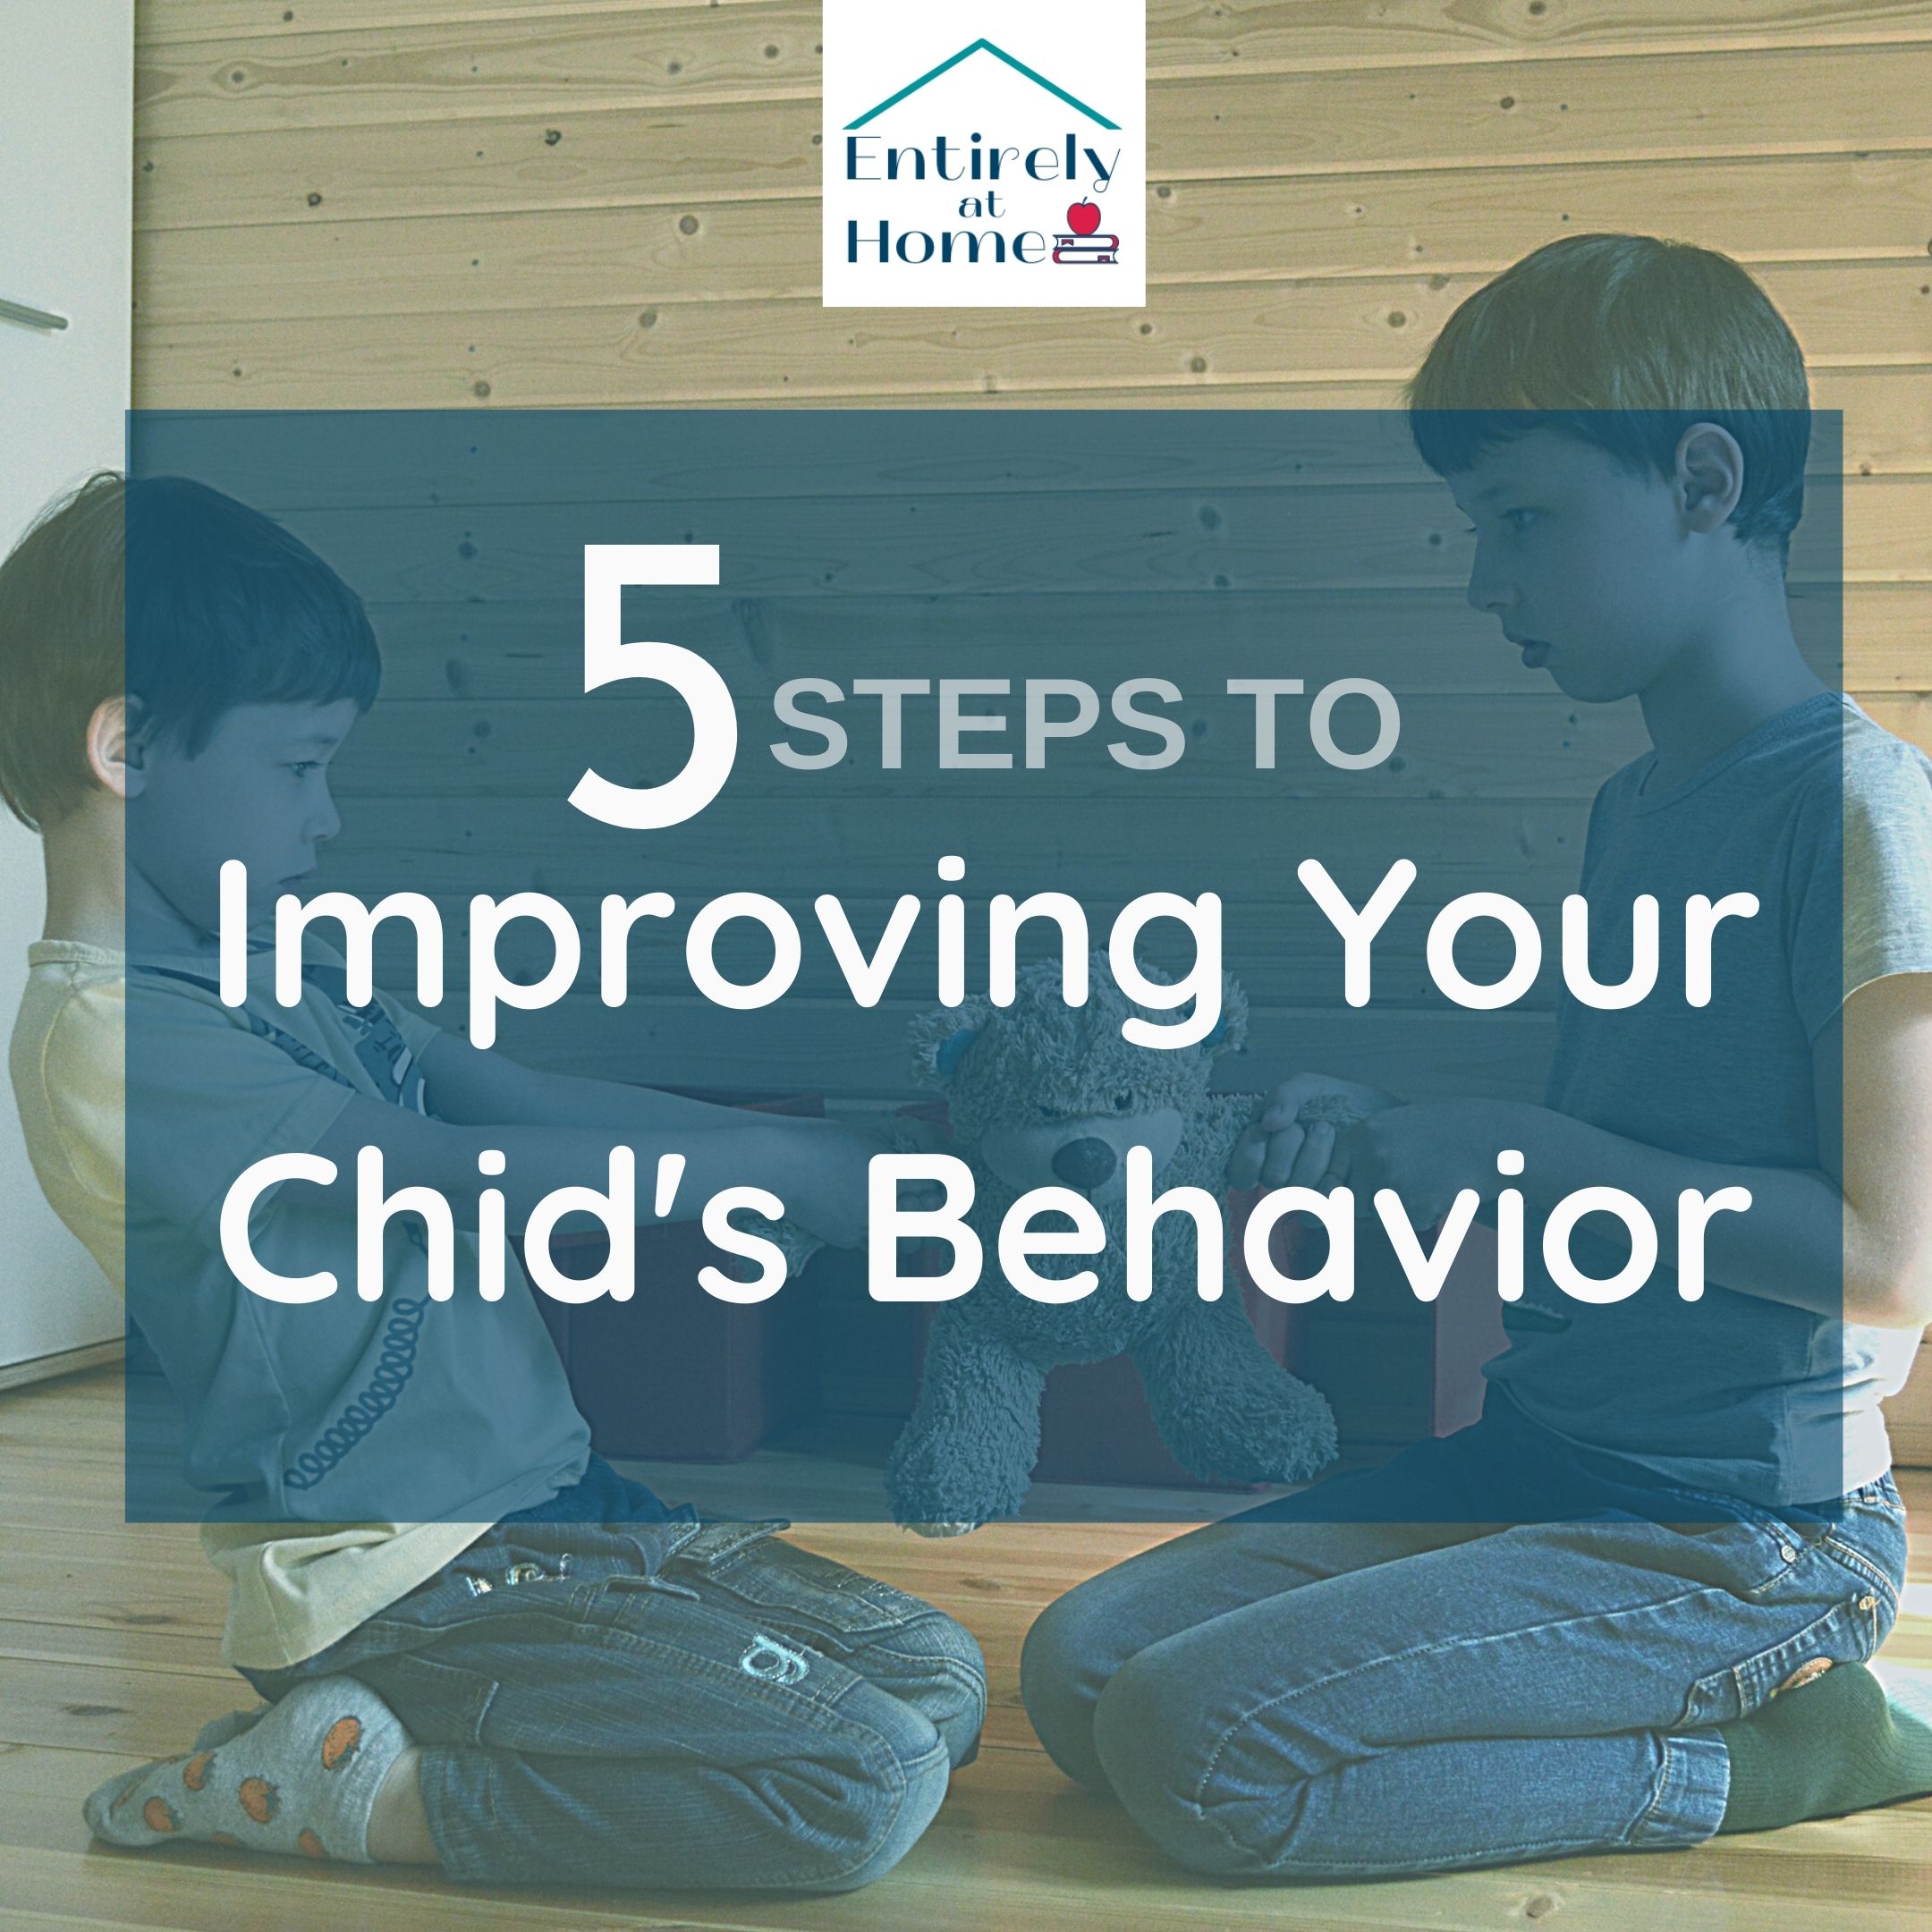 Are you tired of being frustrated as a parent? Click here and read 5 clear steps to help you improve your child's behavior in your home. #parenting #homeschoolmom #talktoyourchildren